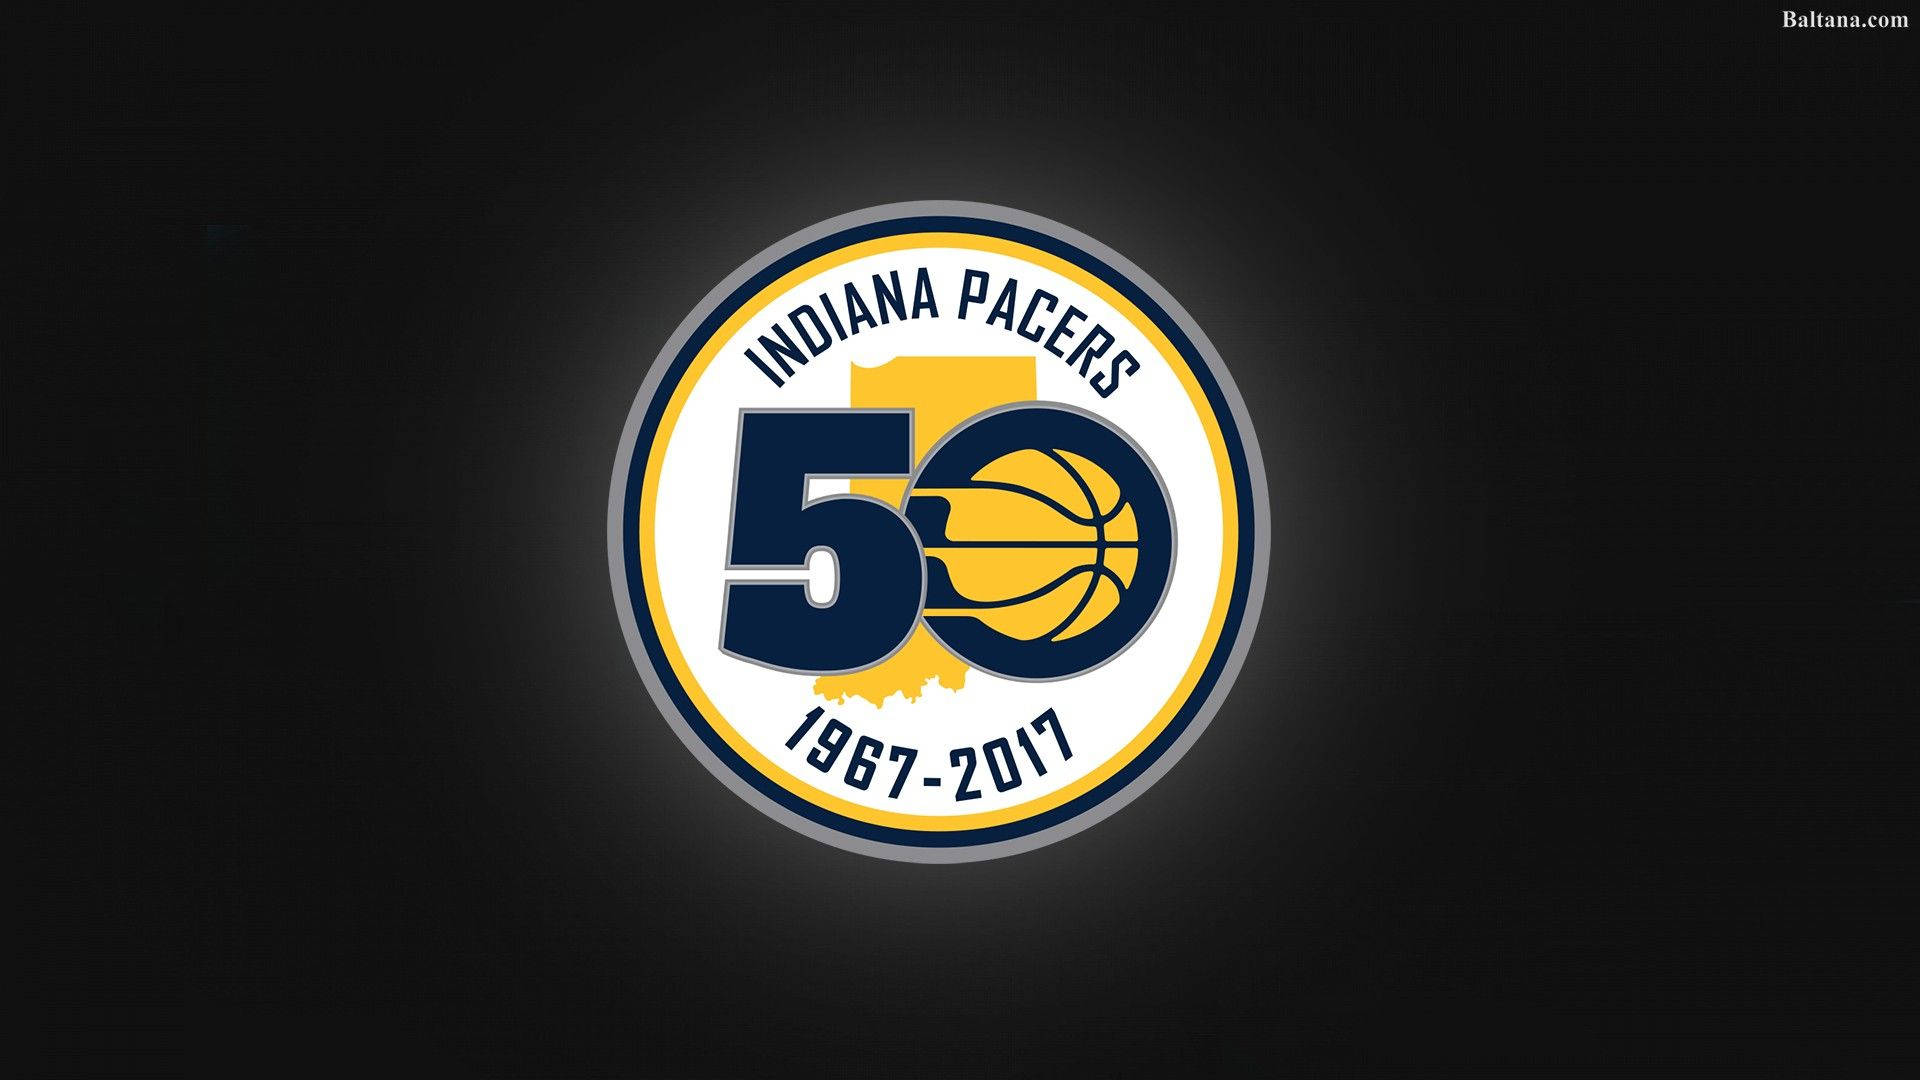 Pacers Wallpaper